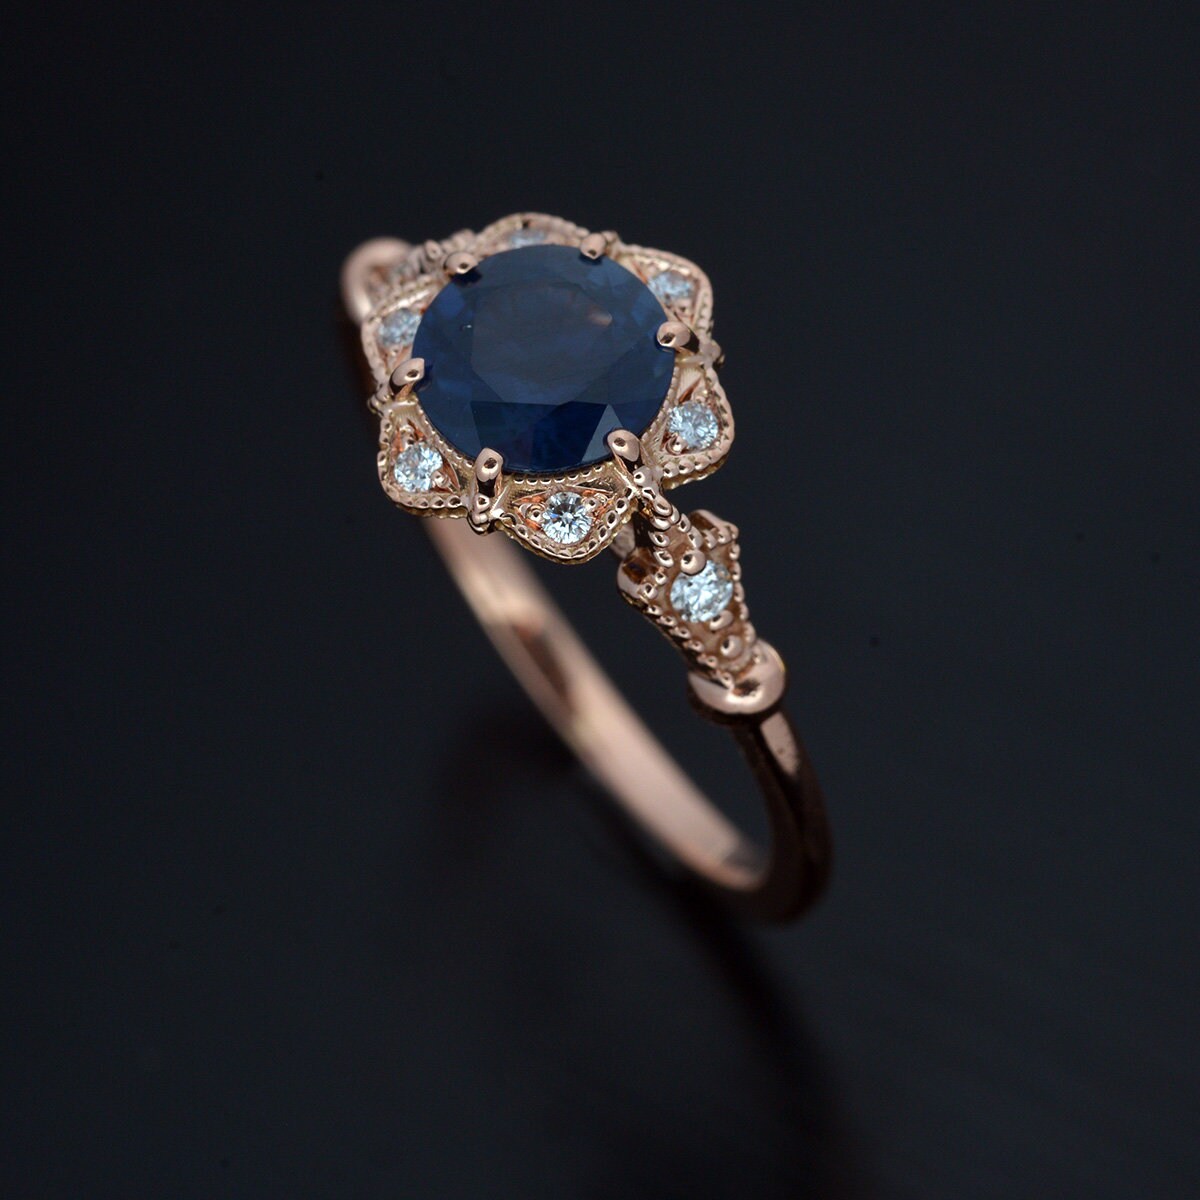 Halo engagement ring in rose gold with Natural Blue Sapphire | Etsy